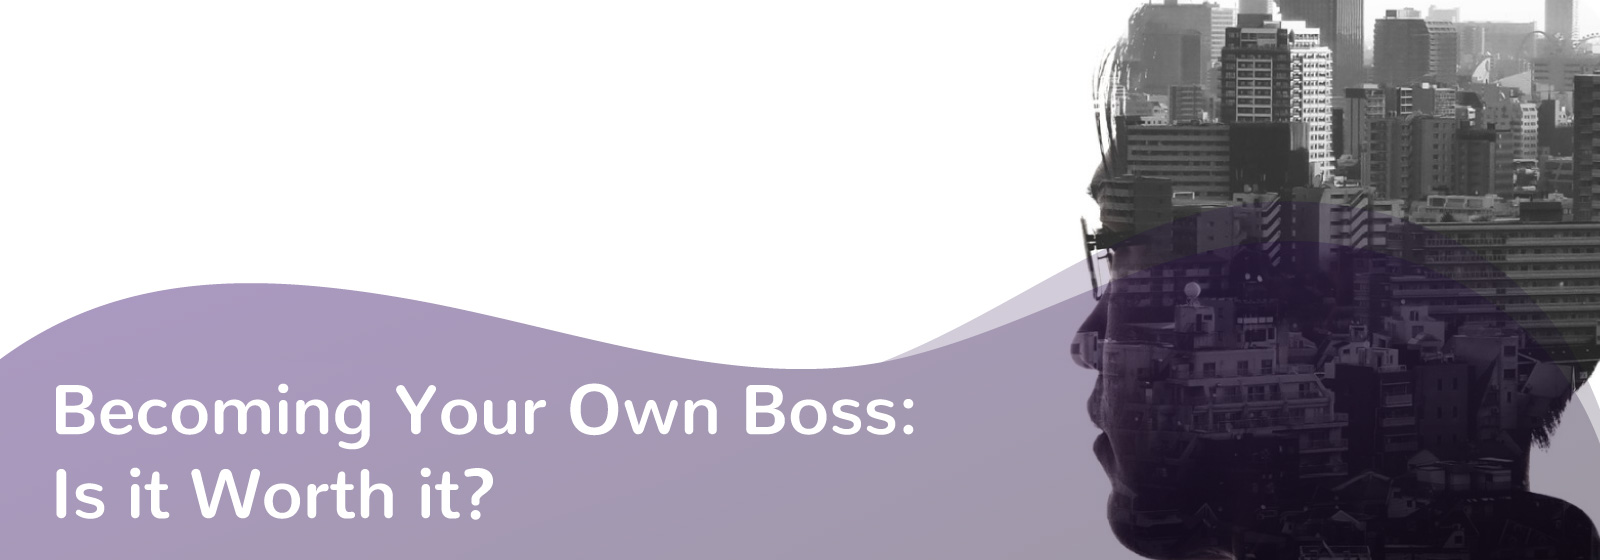 Is it worth it to be your own boss quote